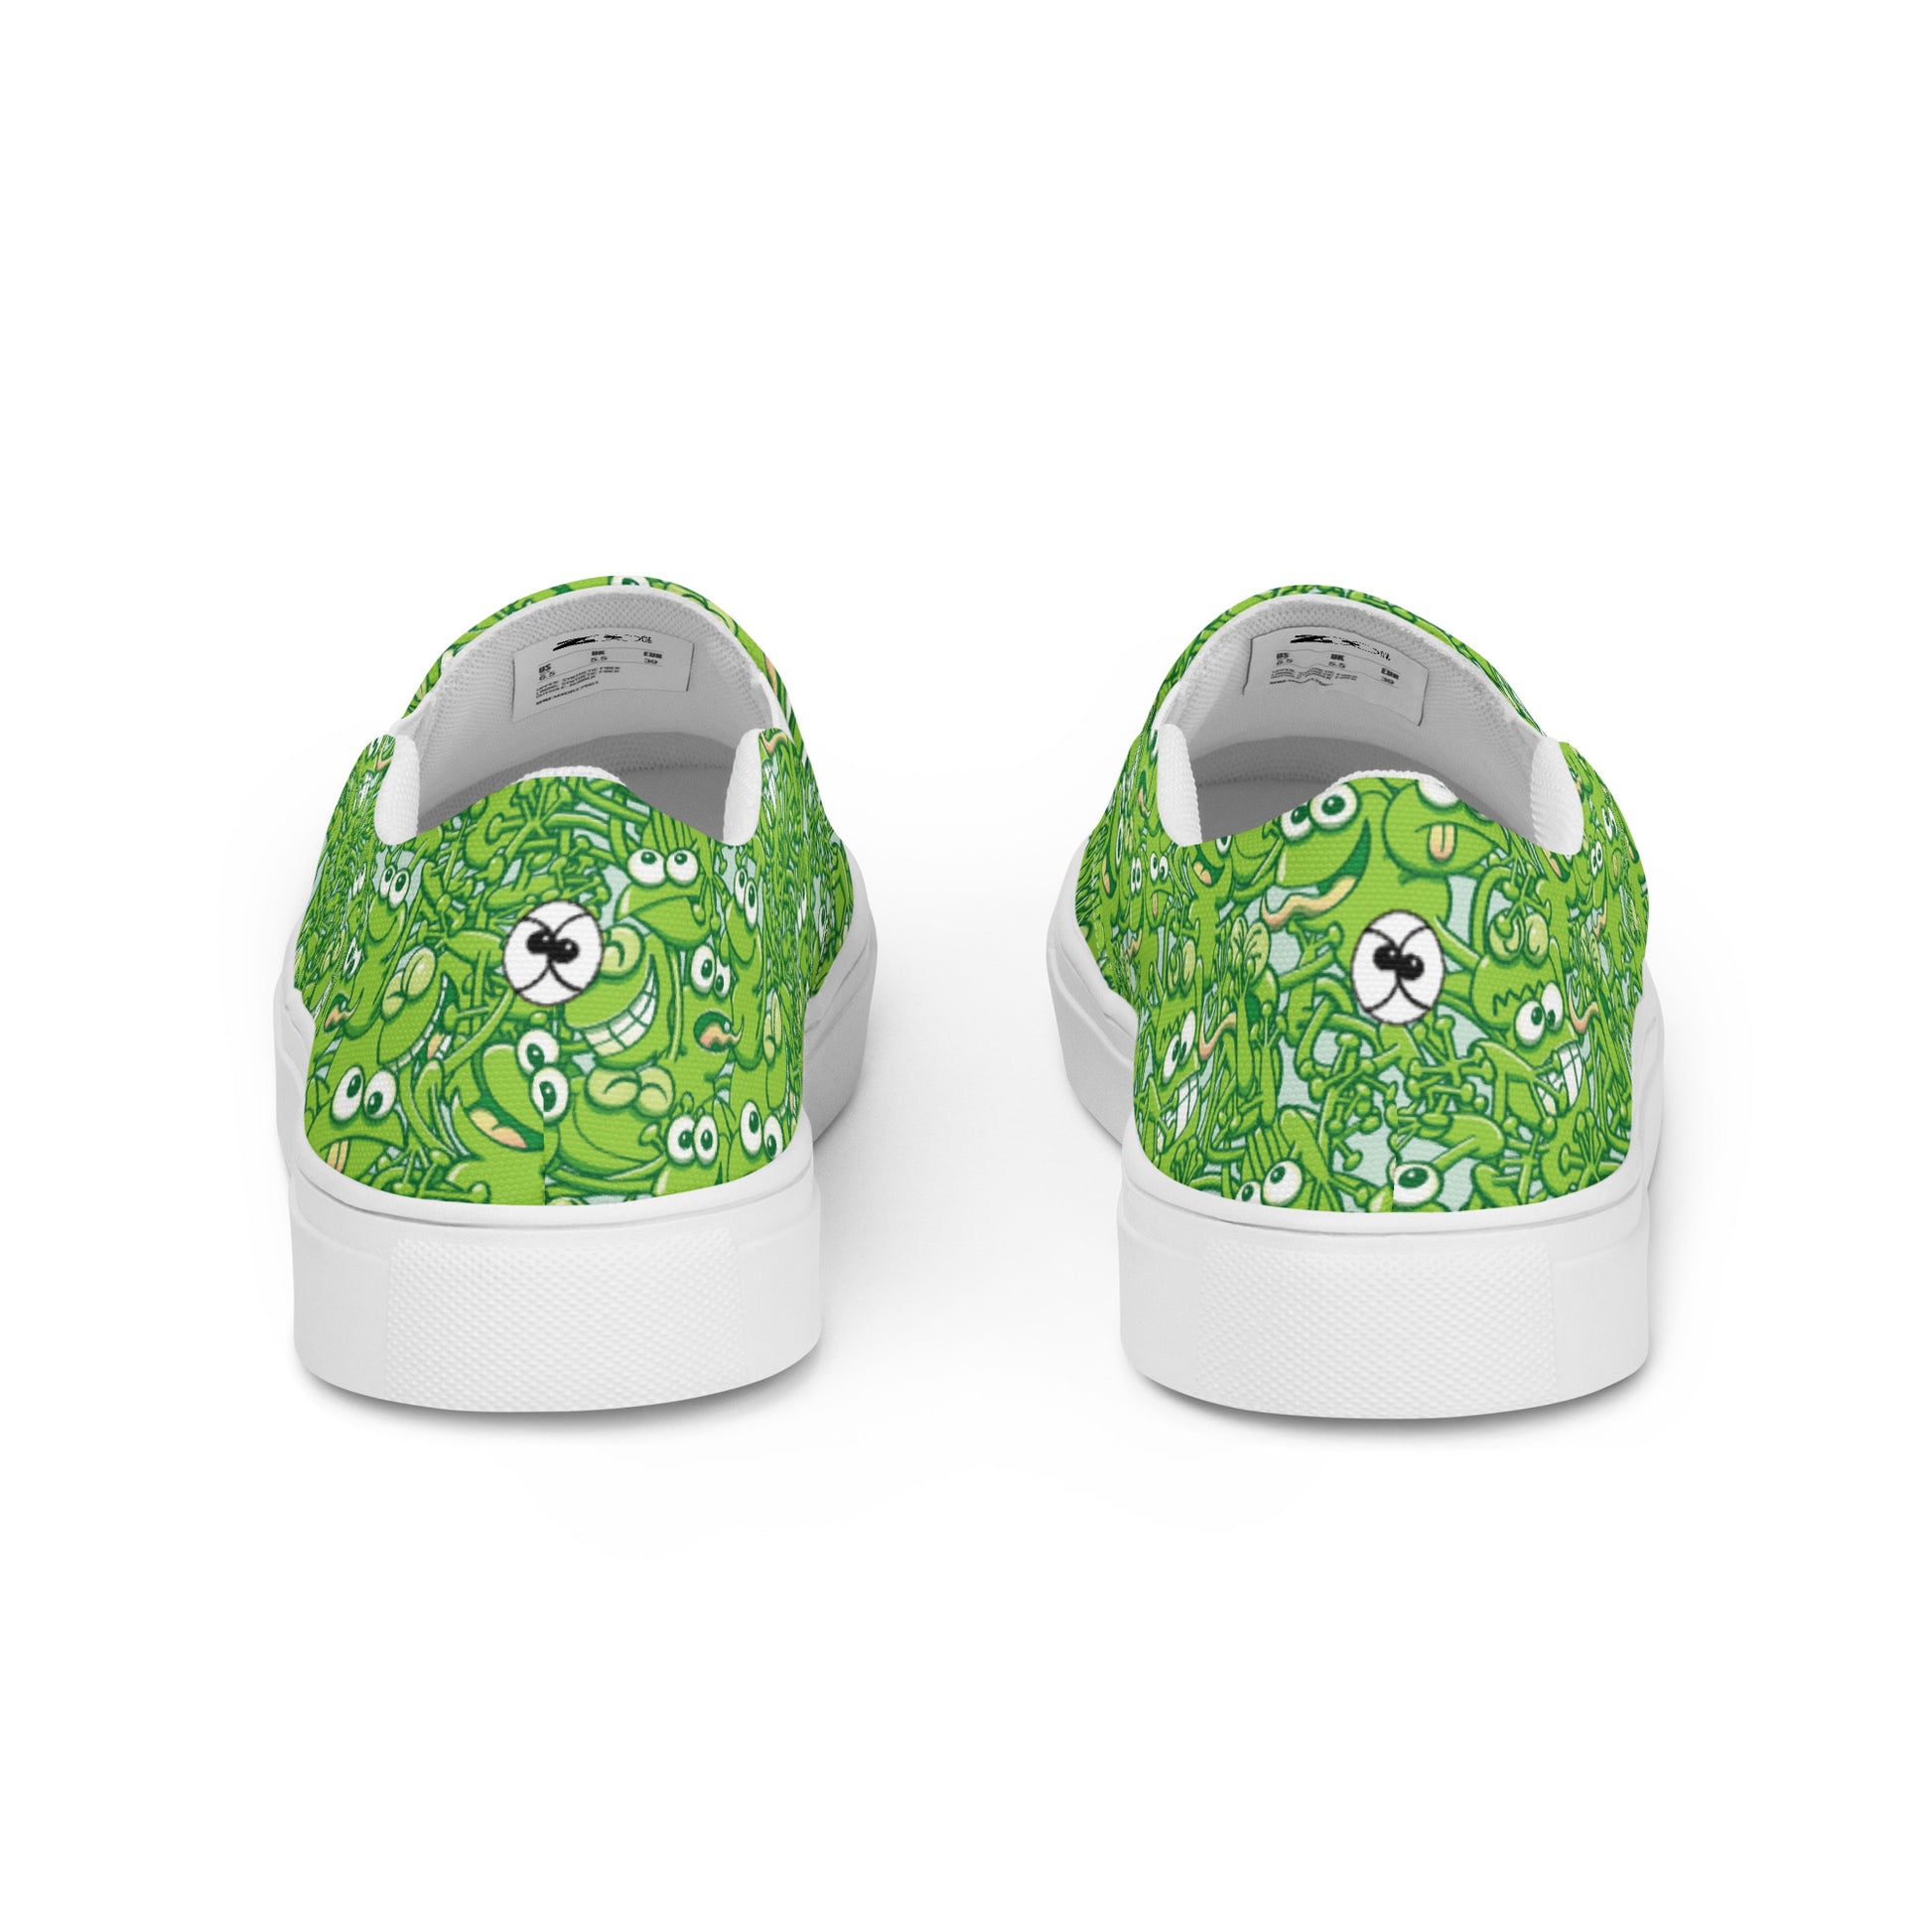 A tangled army of happy green frogs appears when the rain stops Women’s slip-on canvas shoes. Back view